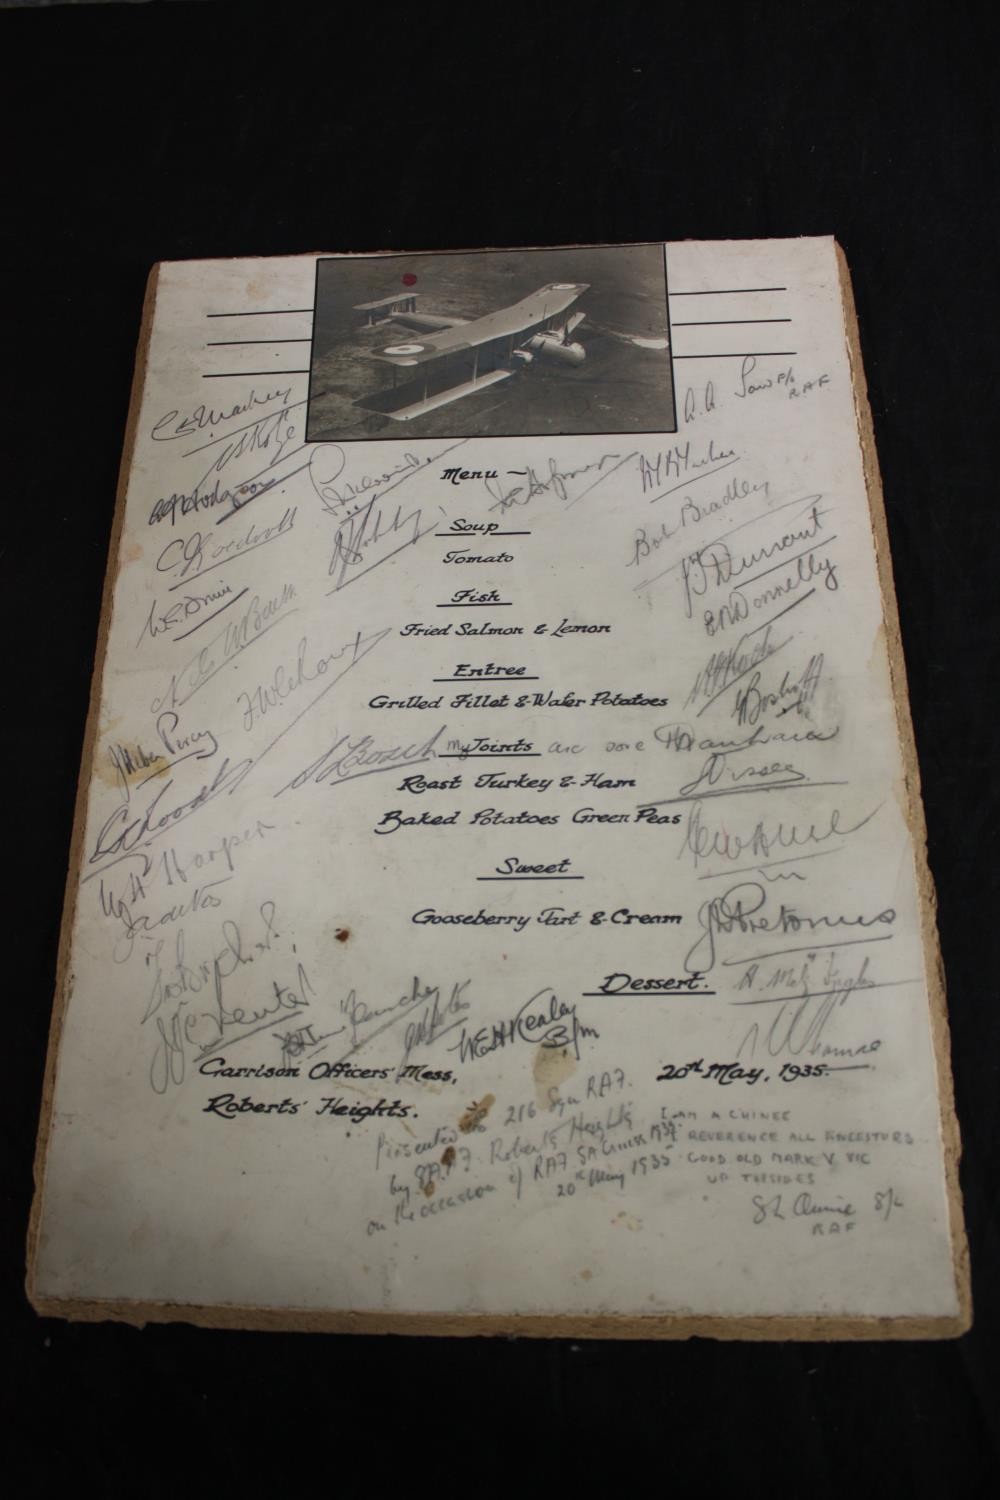 216 Squadron menu signed by the sqn members. Dated 25th May 1935. Signed by pilots and crew in